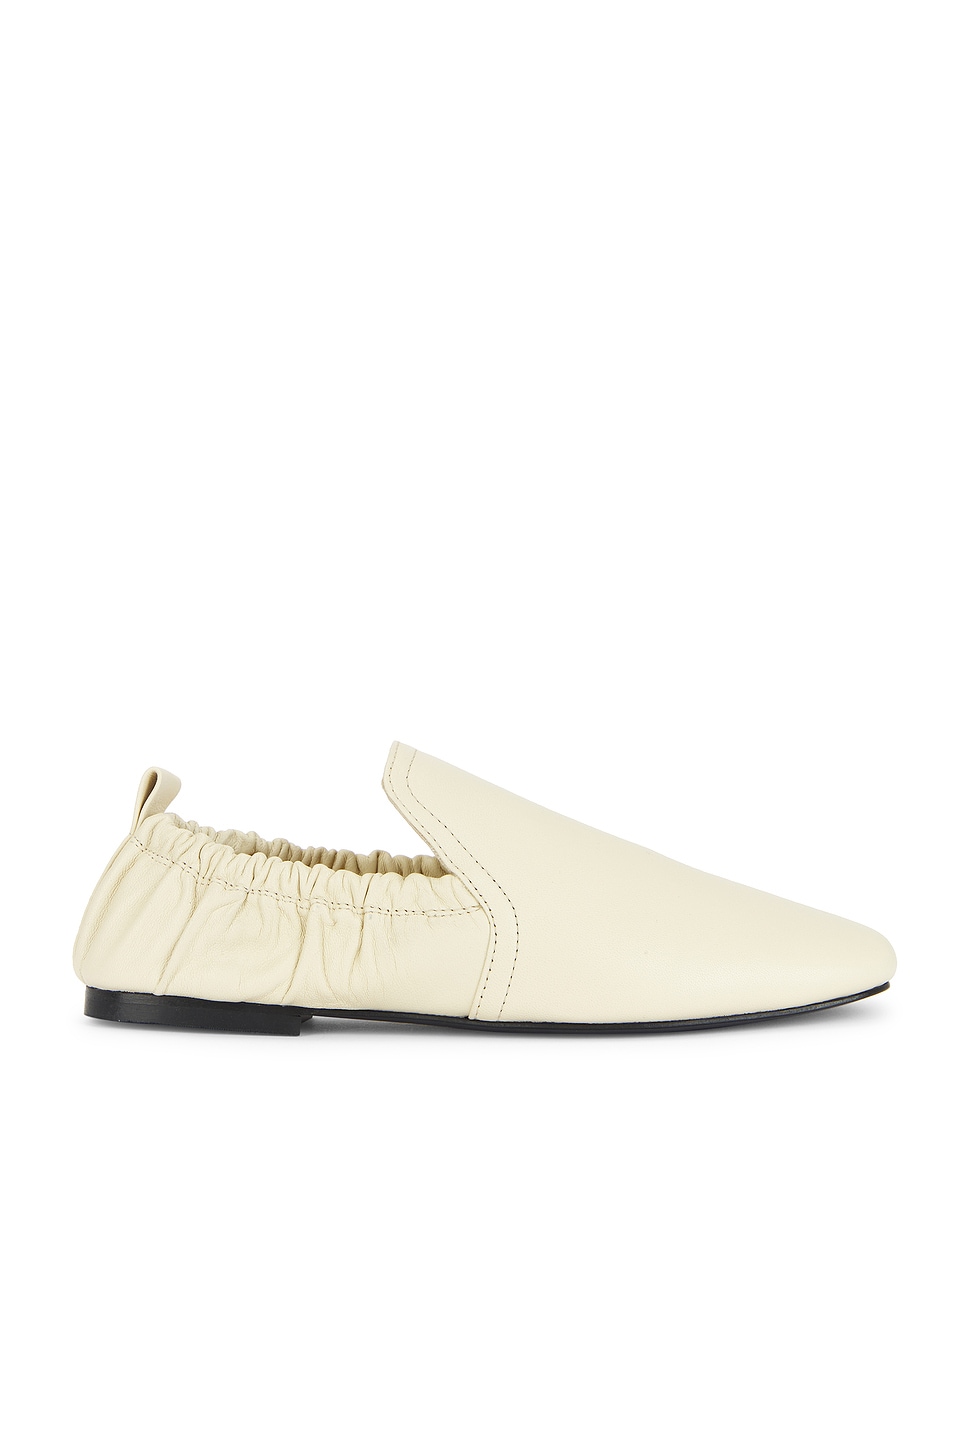 Image 1 of A.EMERY Delphine Loafer in Eggshell